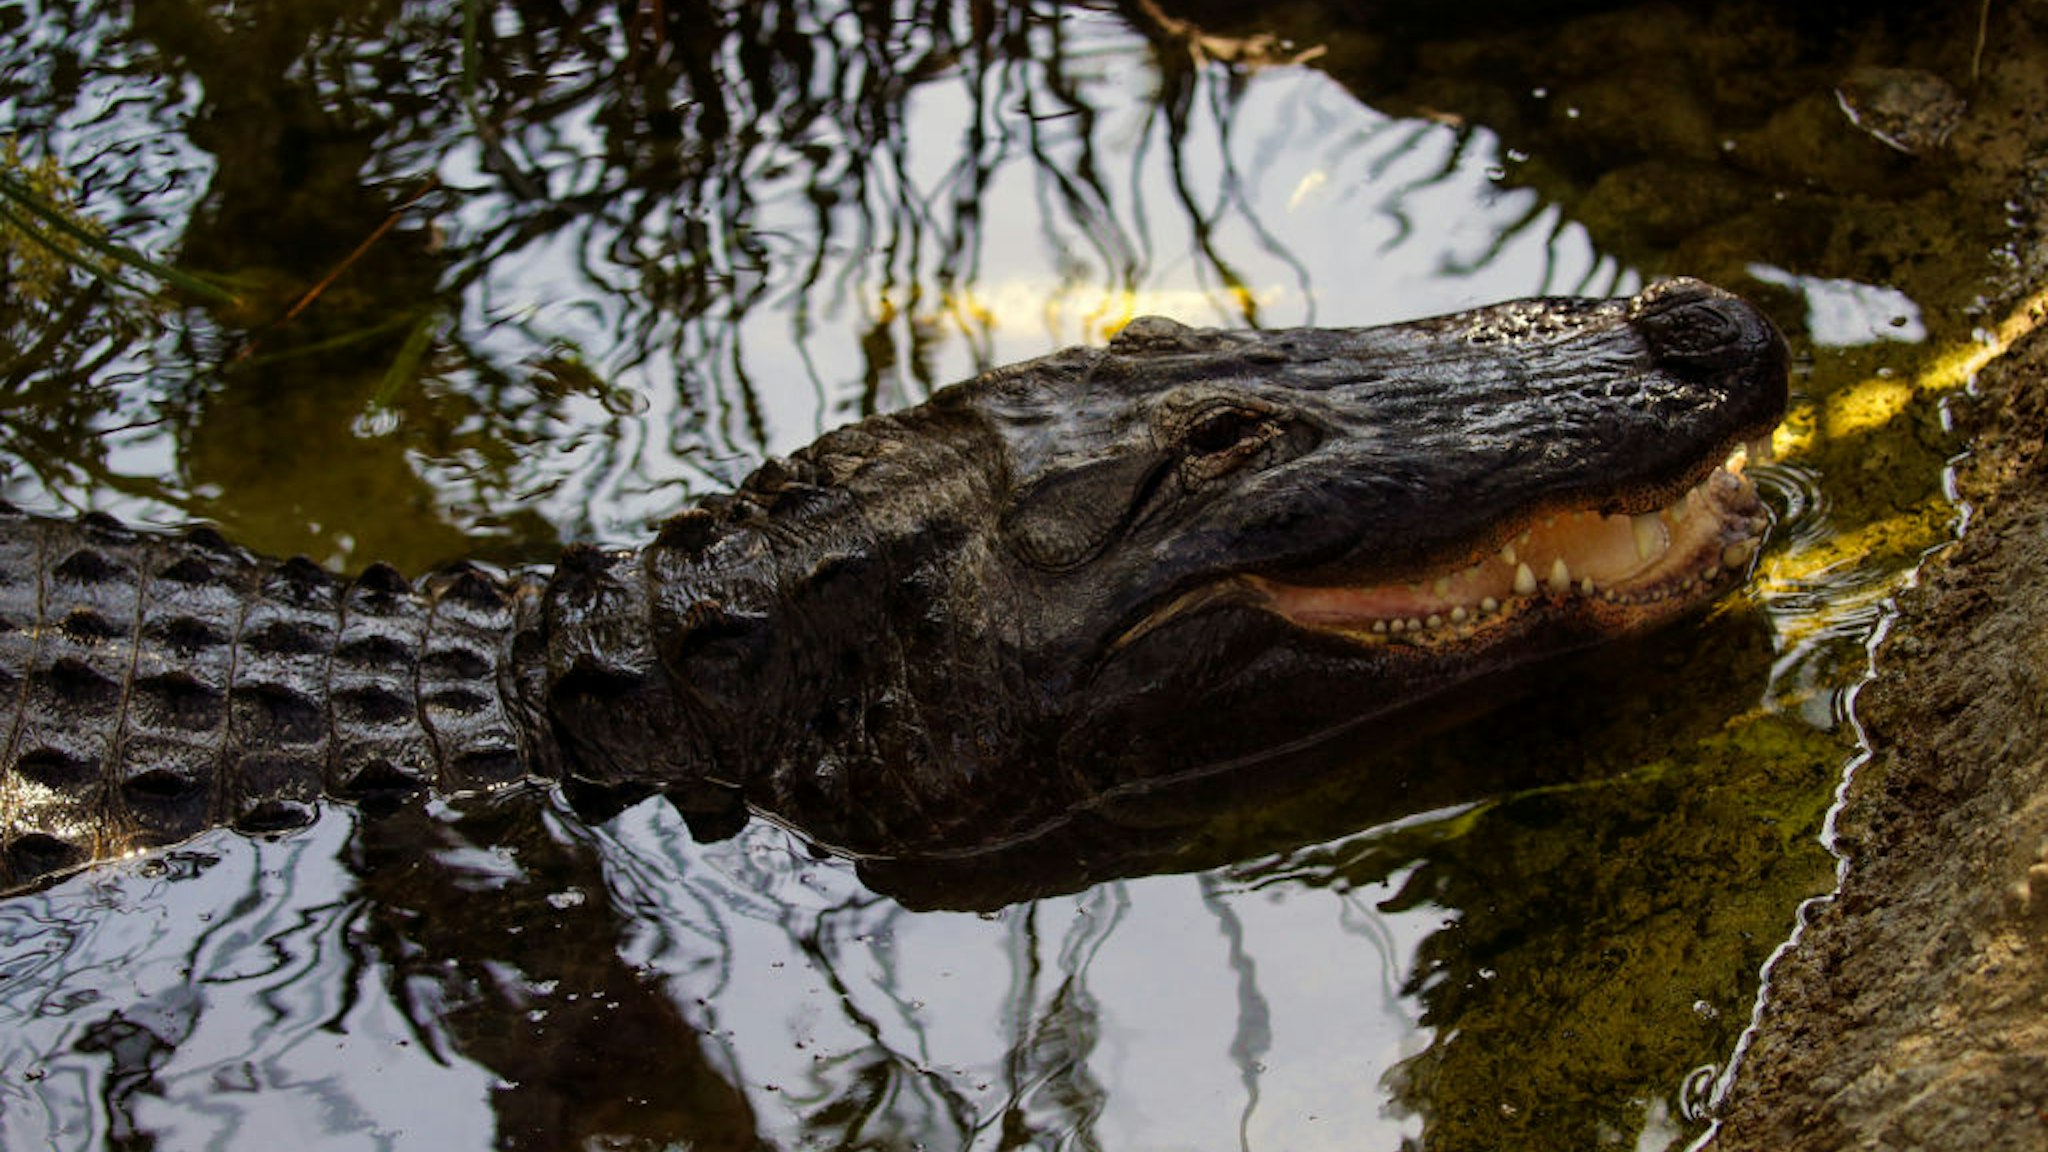 Los Angeles, CA - May 06: It's15th anniversary of the capture of Reggie the Alligator, the American alligator illegally released into an LA park in 2005 and captured in 2007 lives in LA Zoo on Friday, May 6, 2022 in Los Angeles, CA. (Irfan Khan / Los Angeles Times via Getty Images)